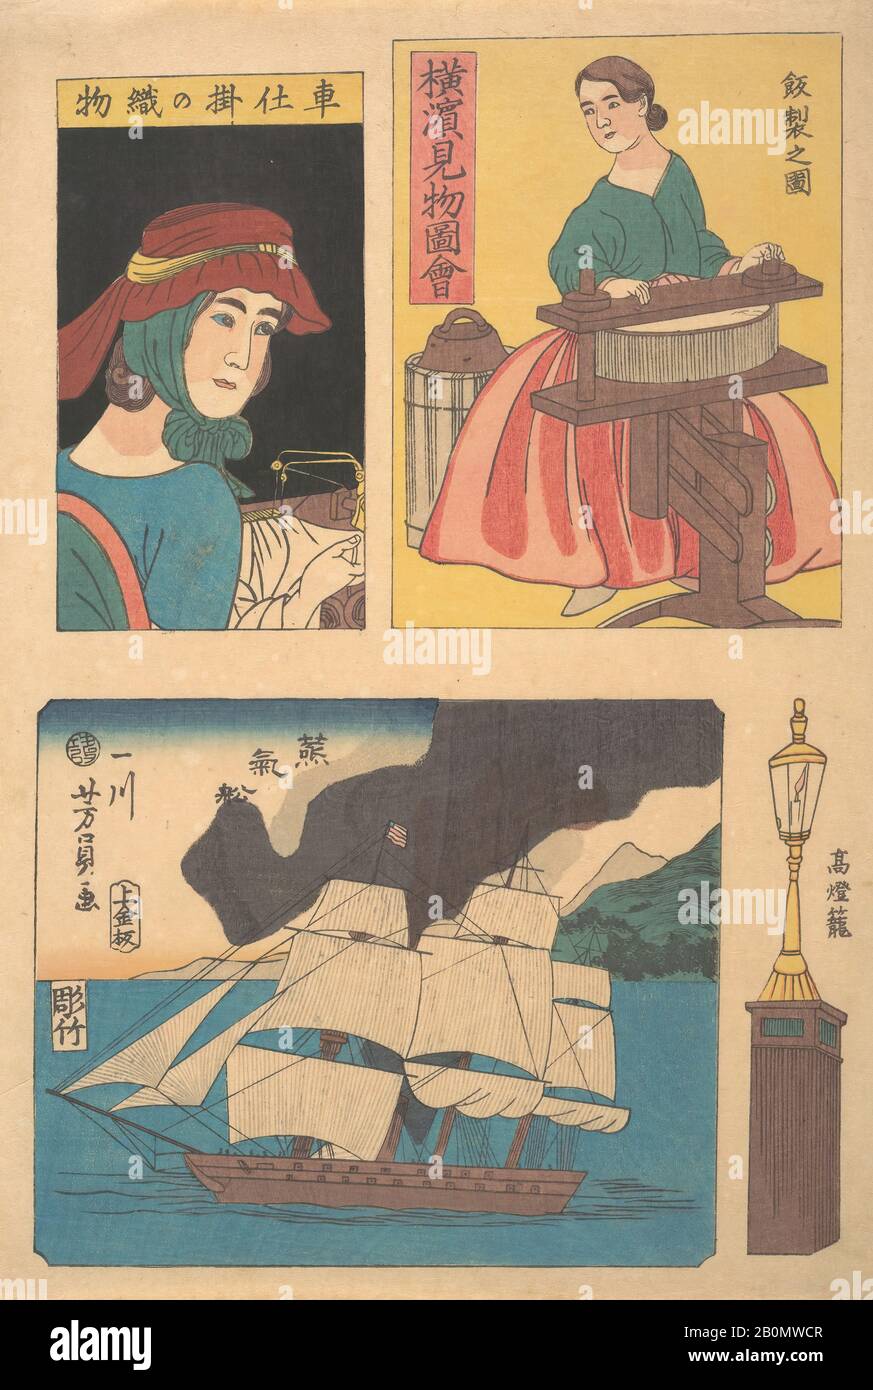 Utagawa Yoshikazu, Picture of Sights in Yokohama: Woman with a Ringer, Lamp Post, a Steamboat at Full Sail and a Woman with a Sewing Machine, Japan, Edo period (1615–1868), Utagawa Yoshikazu (Japanese, active ca. 1850–1870), 11th month, 1860, Japan, Polychrome woodblock print; ink and color on paper, Image: 14 3/4 x 10 in. (37.5 x 25.4 cm), Prints Stock Photo